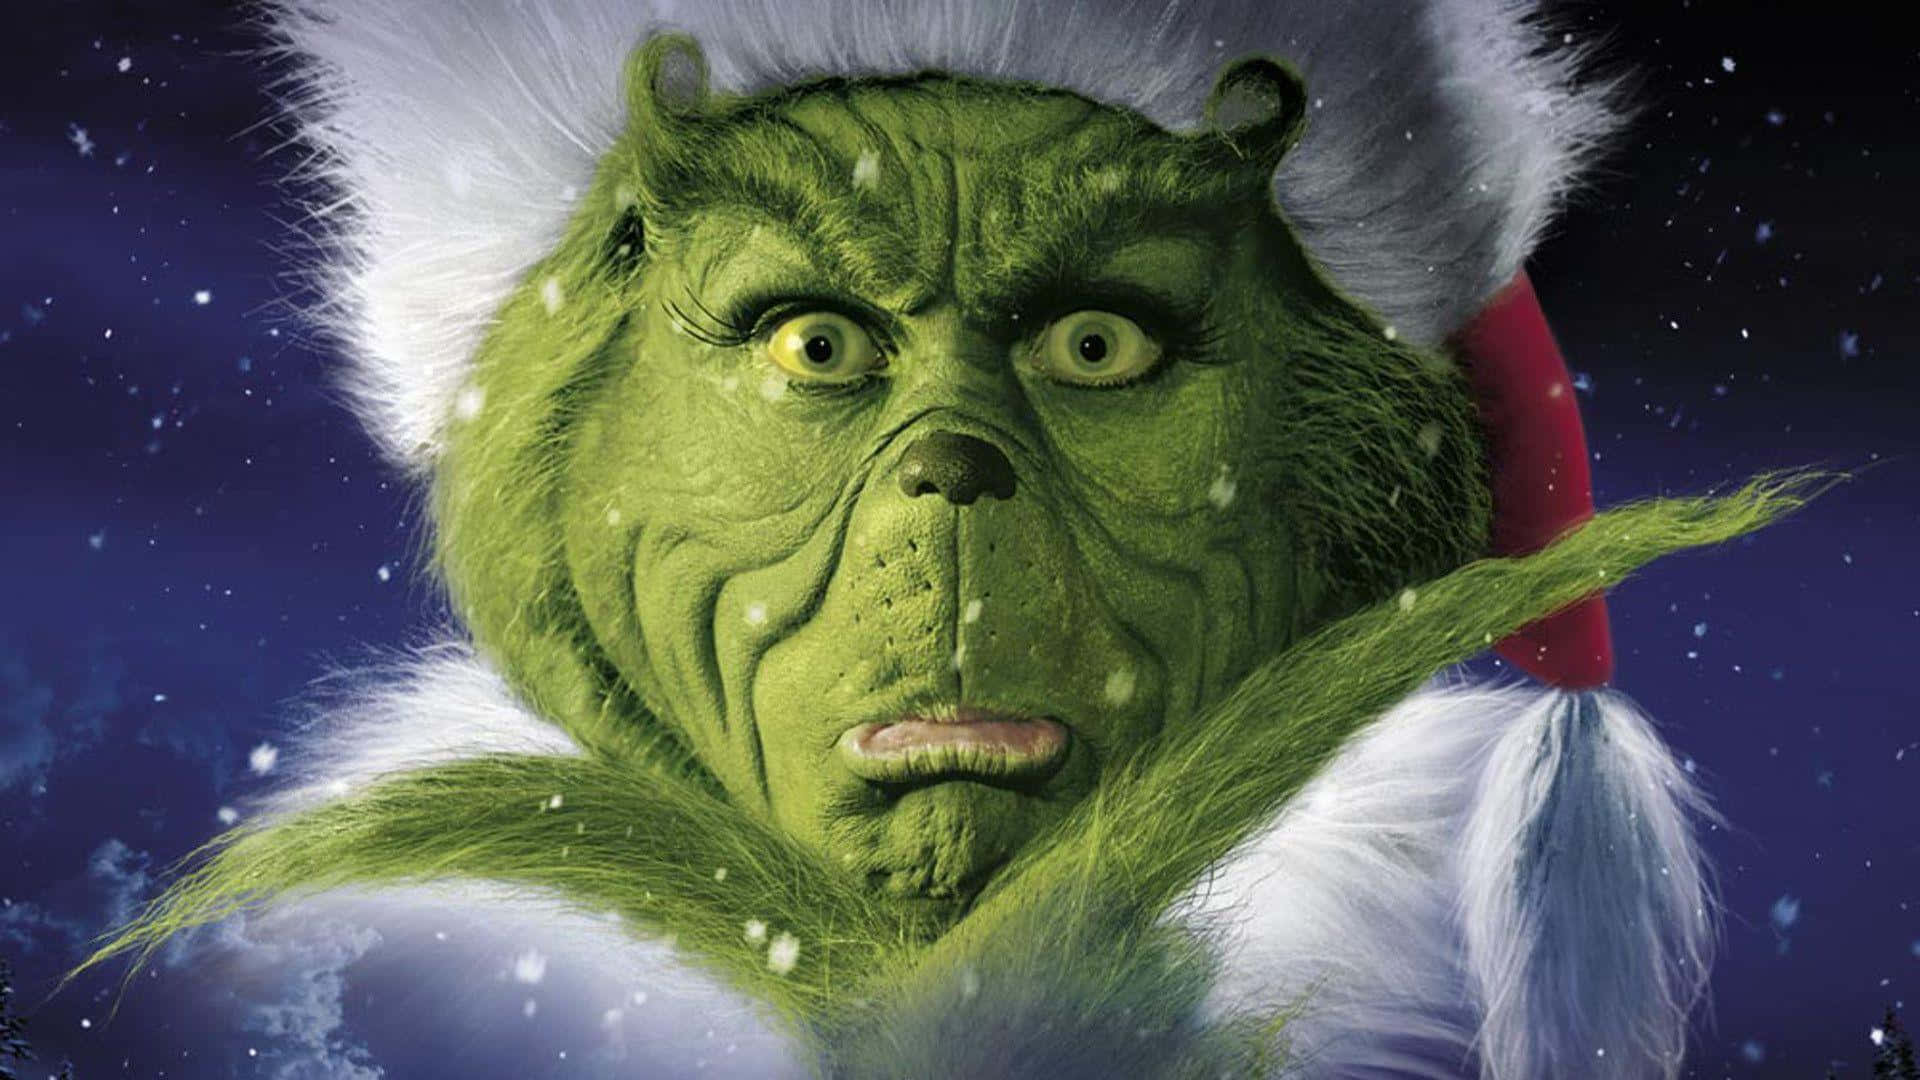 Image  "The Grinch in Zoom Background Form"